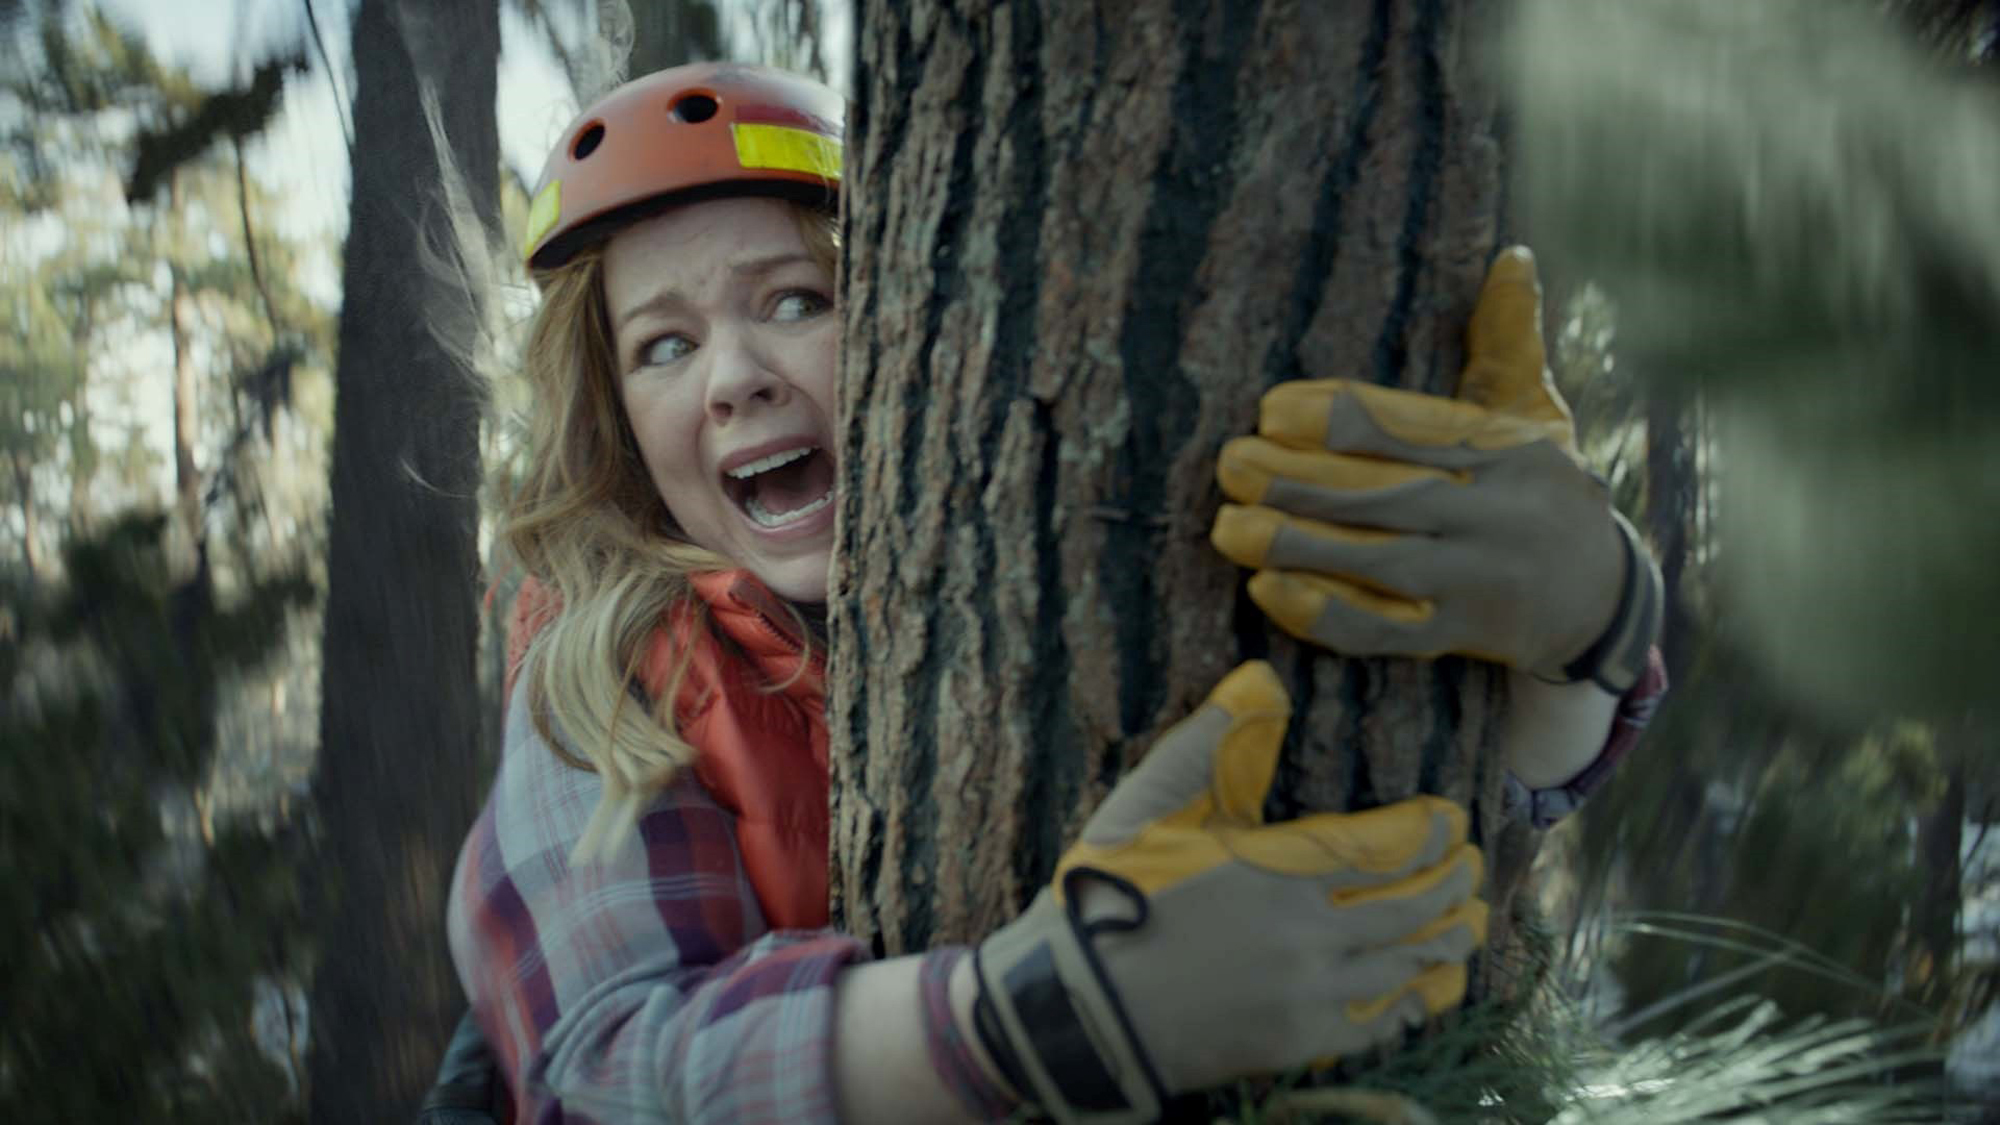 This photo provided by Kia Motors America shows a scene from the company's spot for Super Bowl 51, between the New England Patriots and Atlanta Falcons, Sunday, Feb. 5, 2017. Melissa McCarthy humorously takes on political causes like saving whales, ice caps and trees, each time to disastrous effect, in Kia’s 60-second third-quarter ad to promote the fuel efficiency of its 2017 Niro crossover.